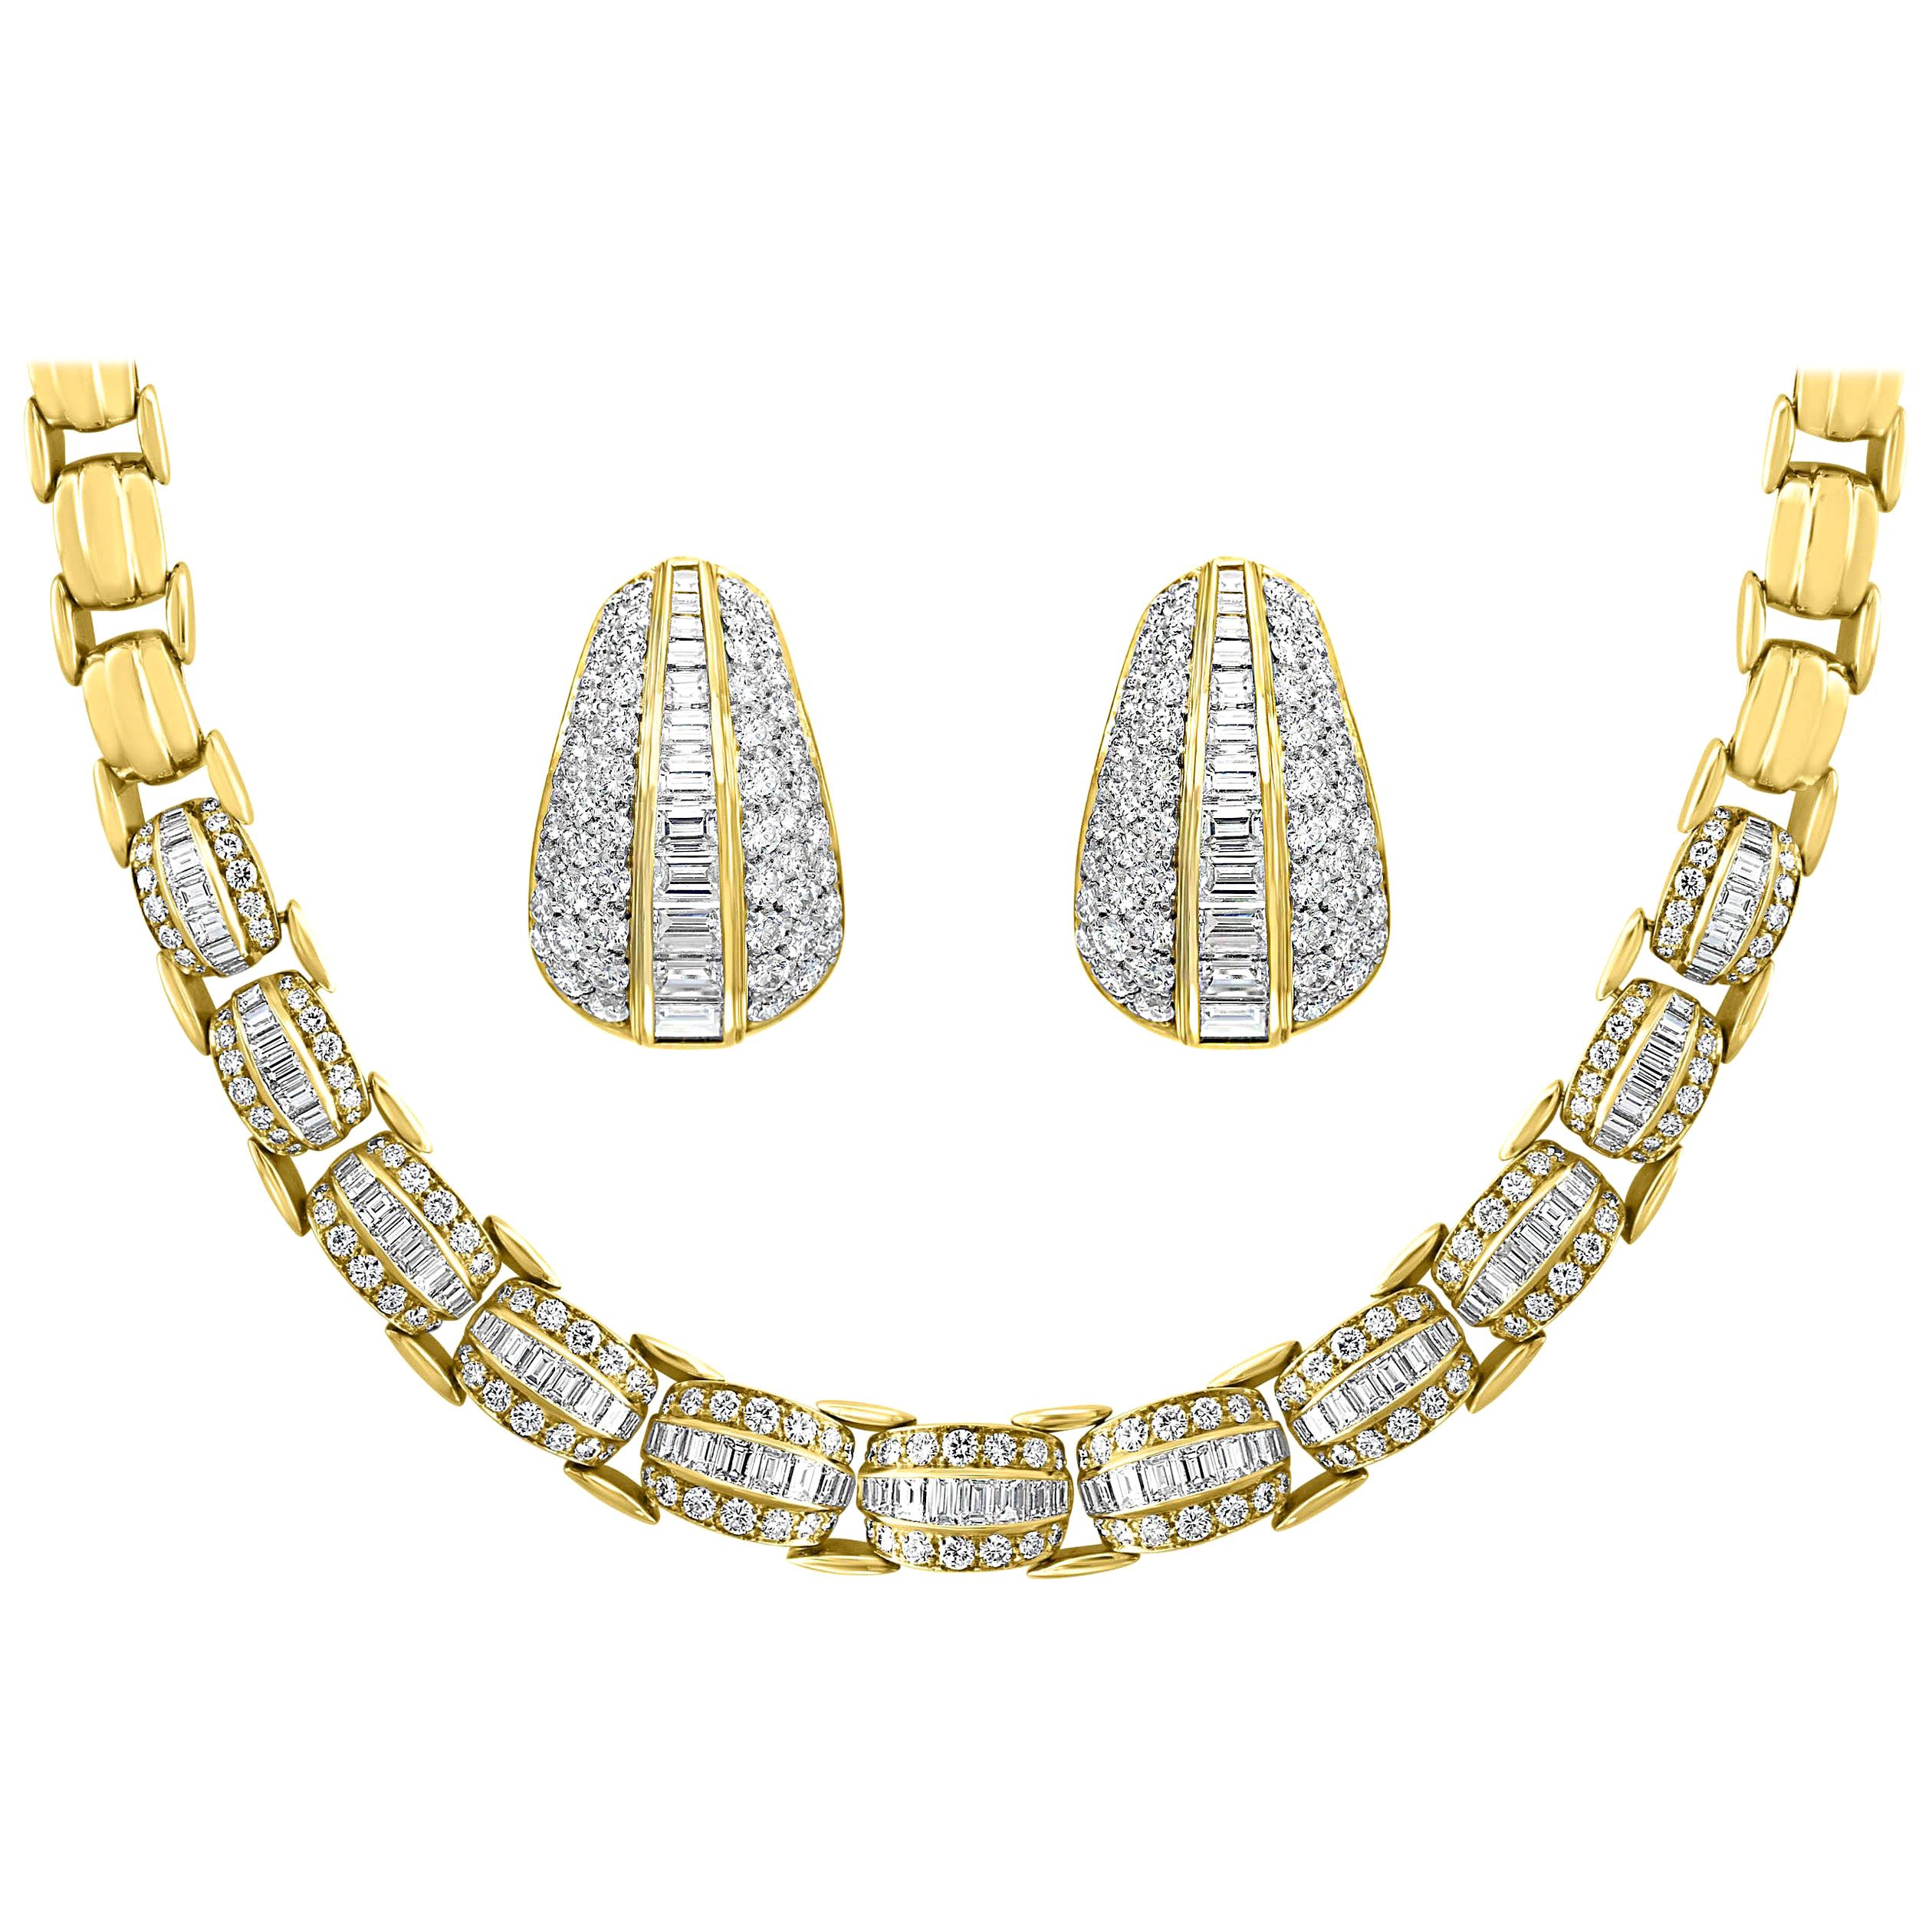 23 Ct Diamond Necklace & Earrings Bridal Suite by Star Forest 105 Gm 18 K Gold